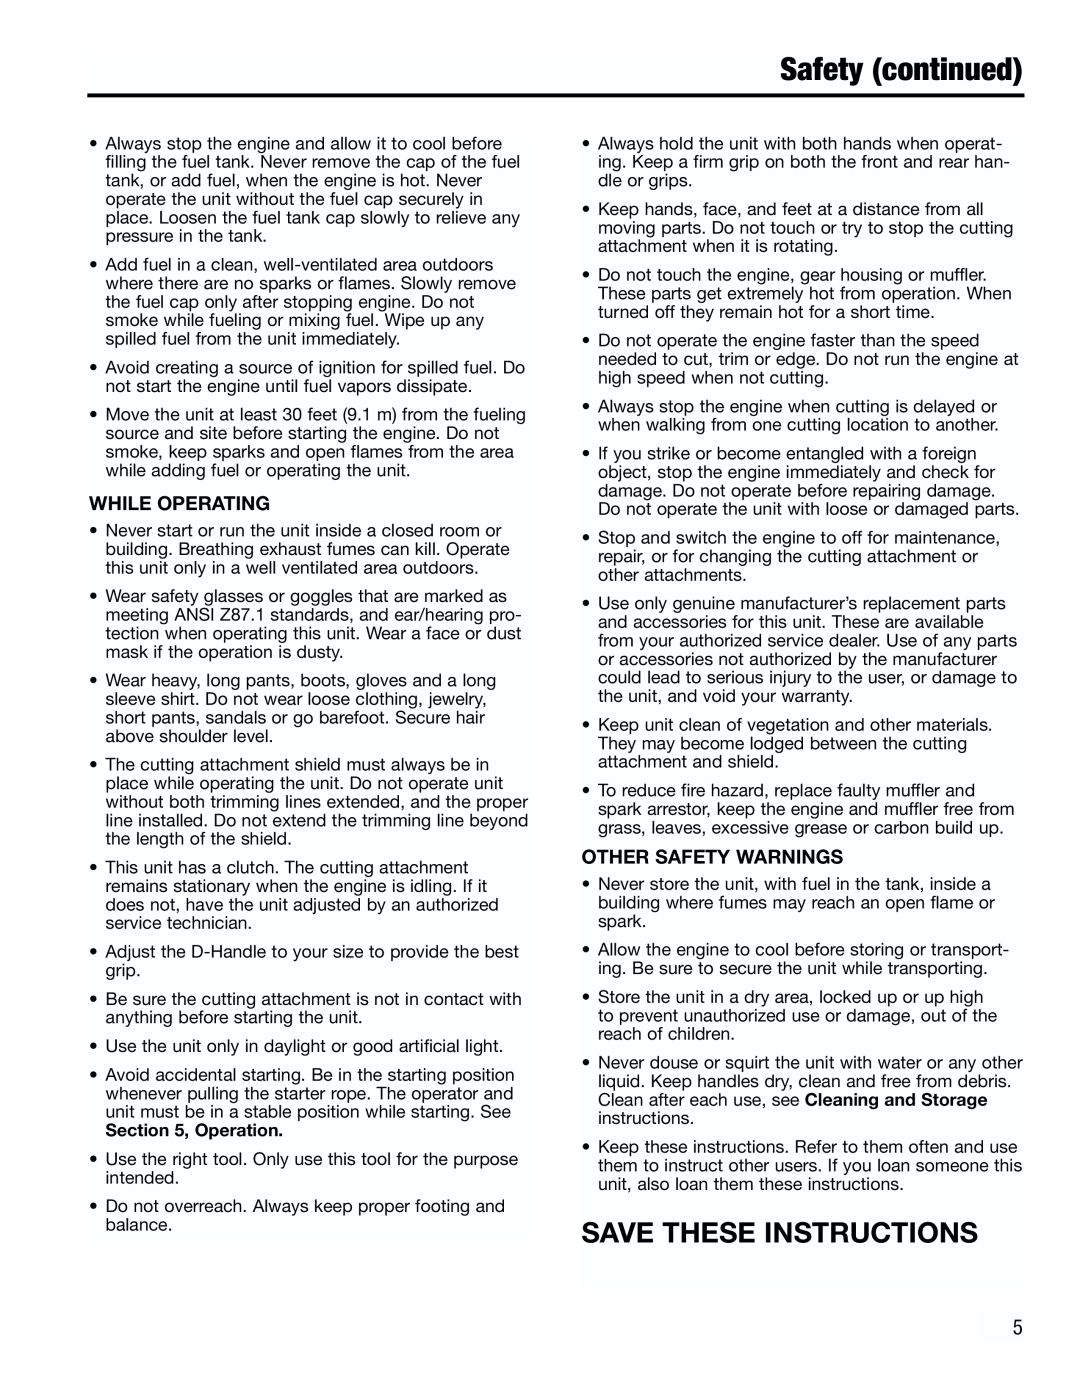 Troy-Bilt TB3000 manual Safety continued, Save These Instructions, Operation 